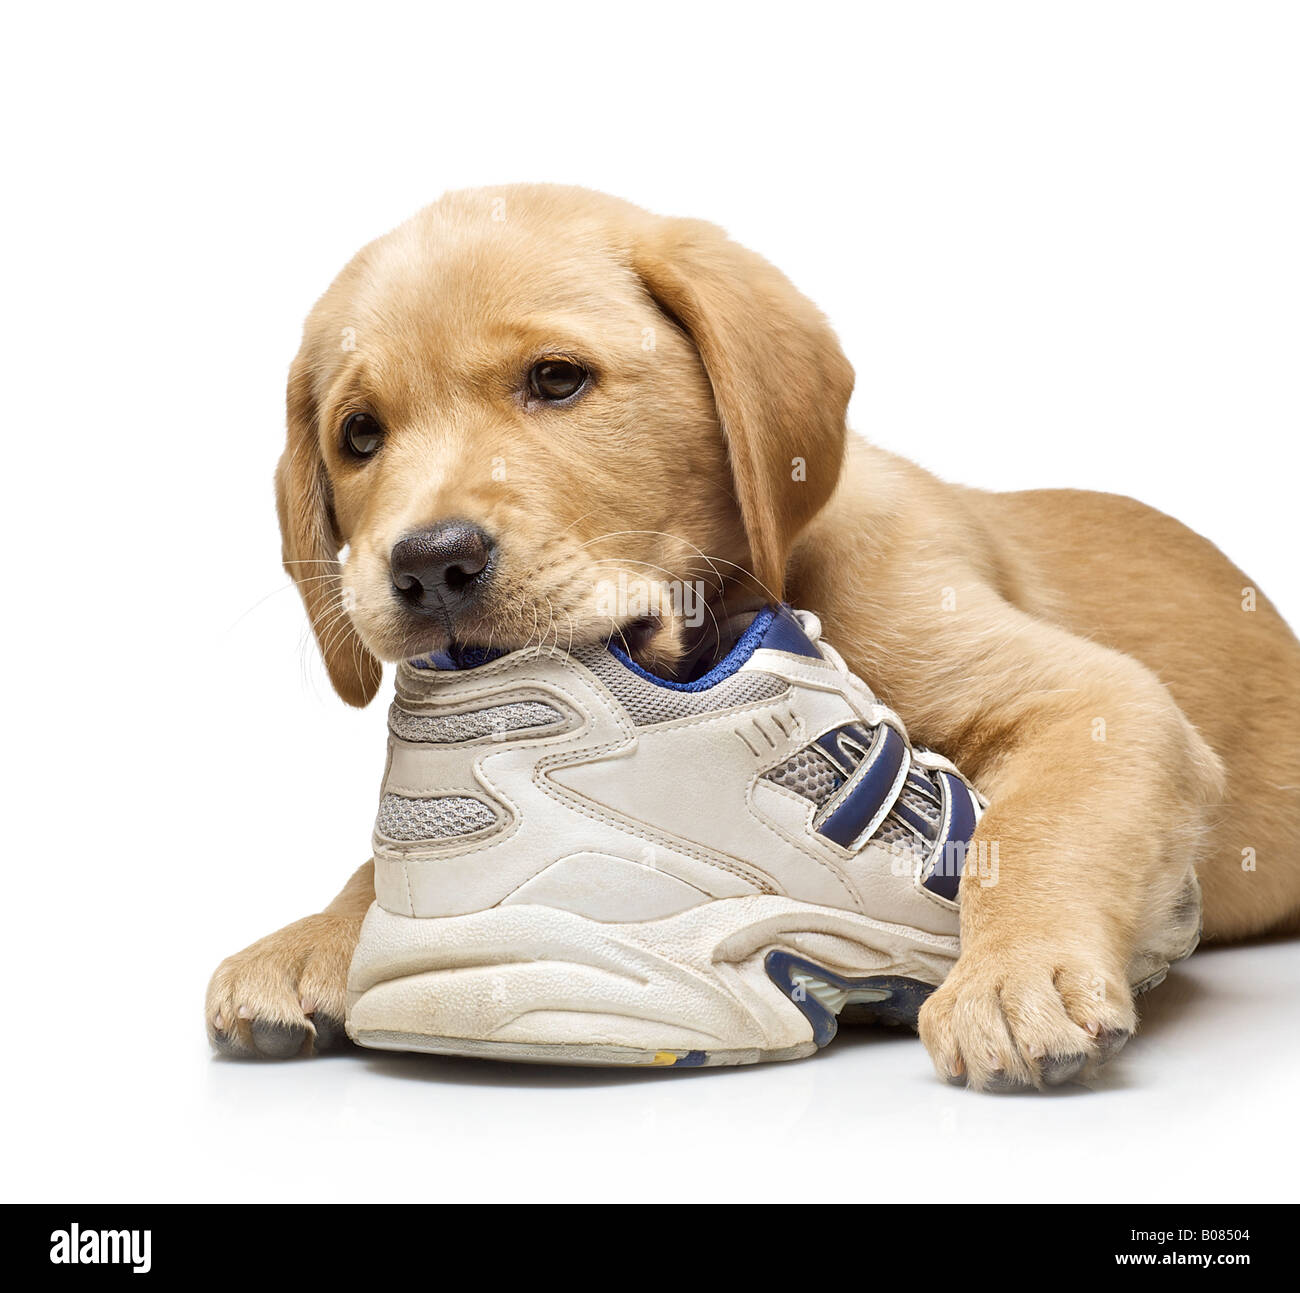 9 week old Labrador cross Golden Retriever puppy chewing on a white running  shoe on a white background Stock Photo - Alamy